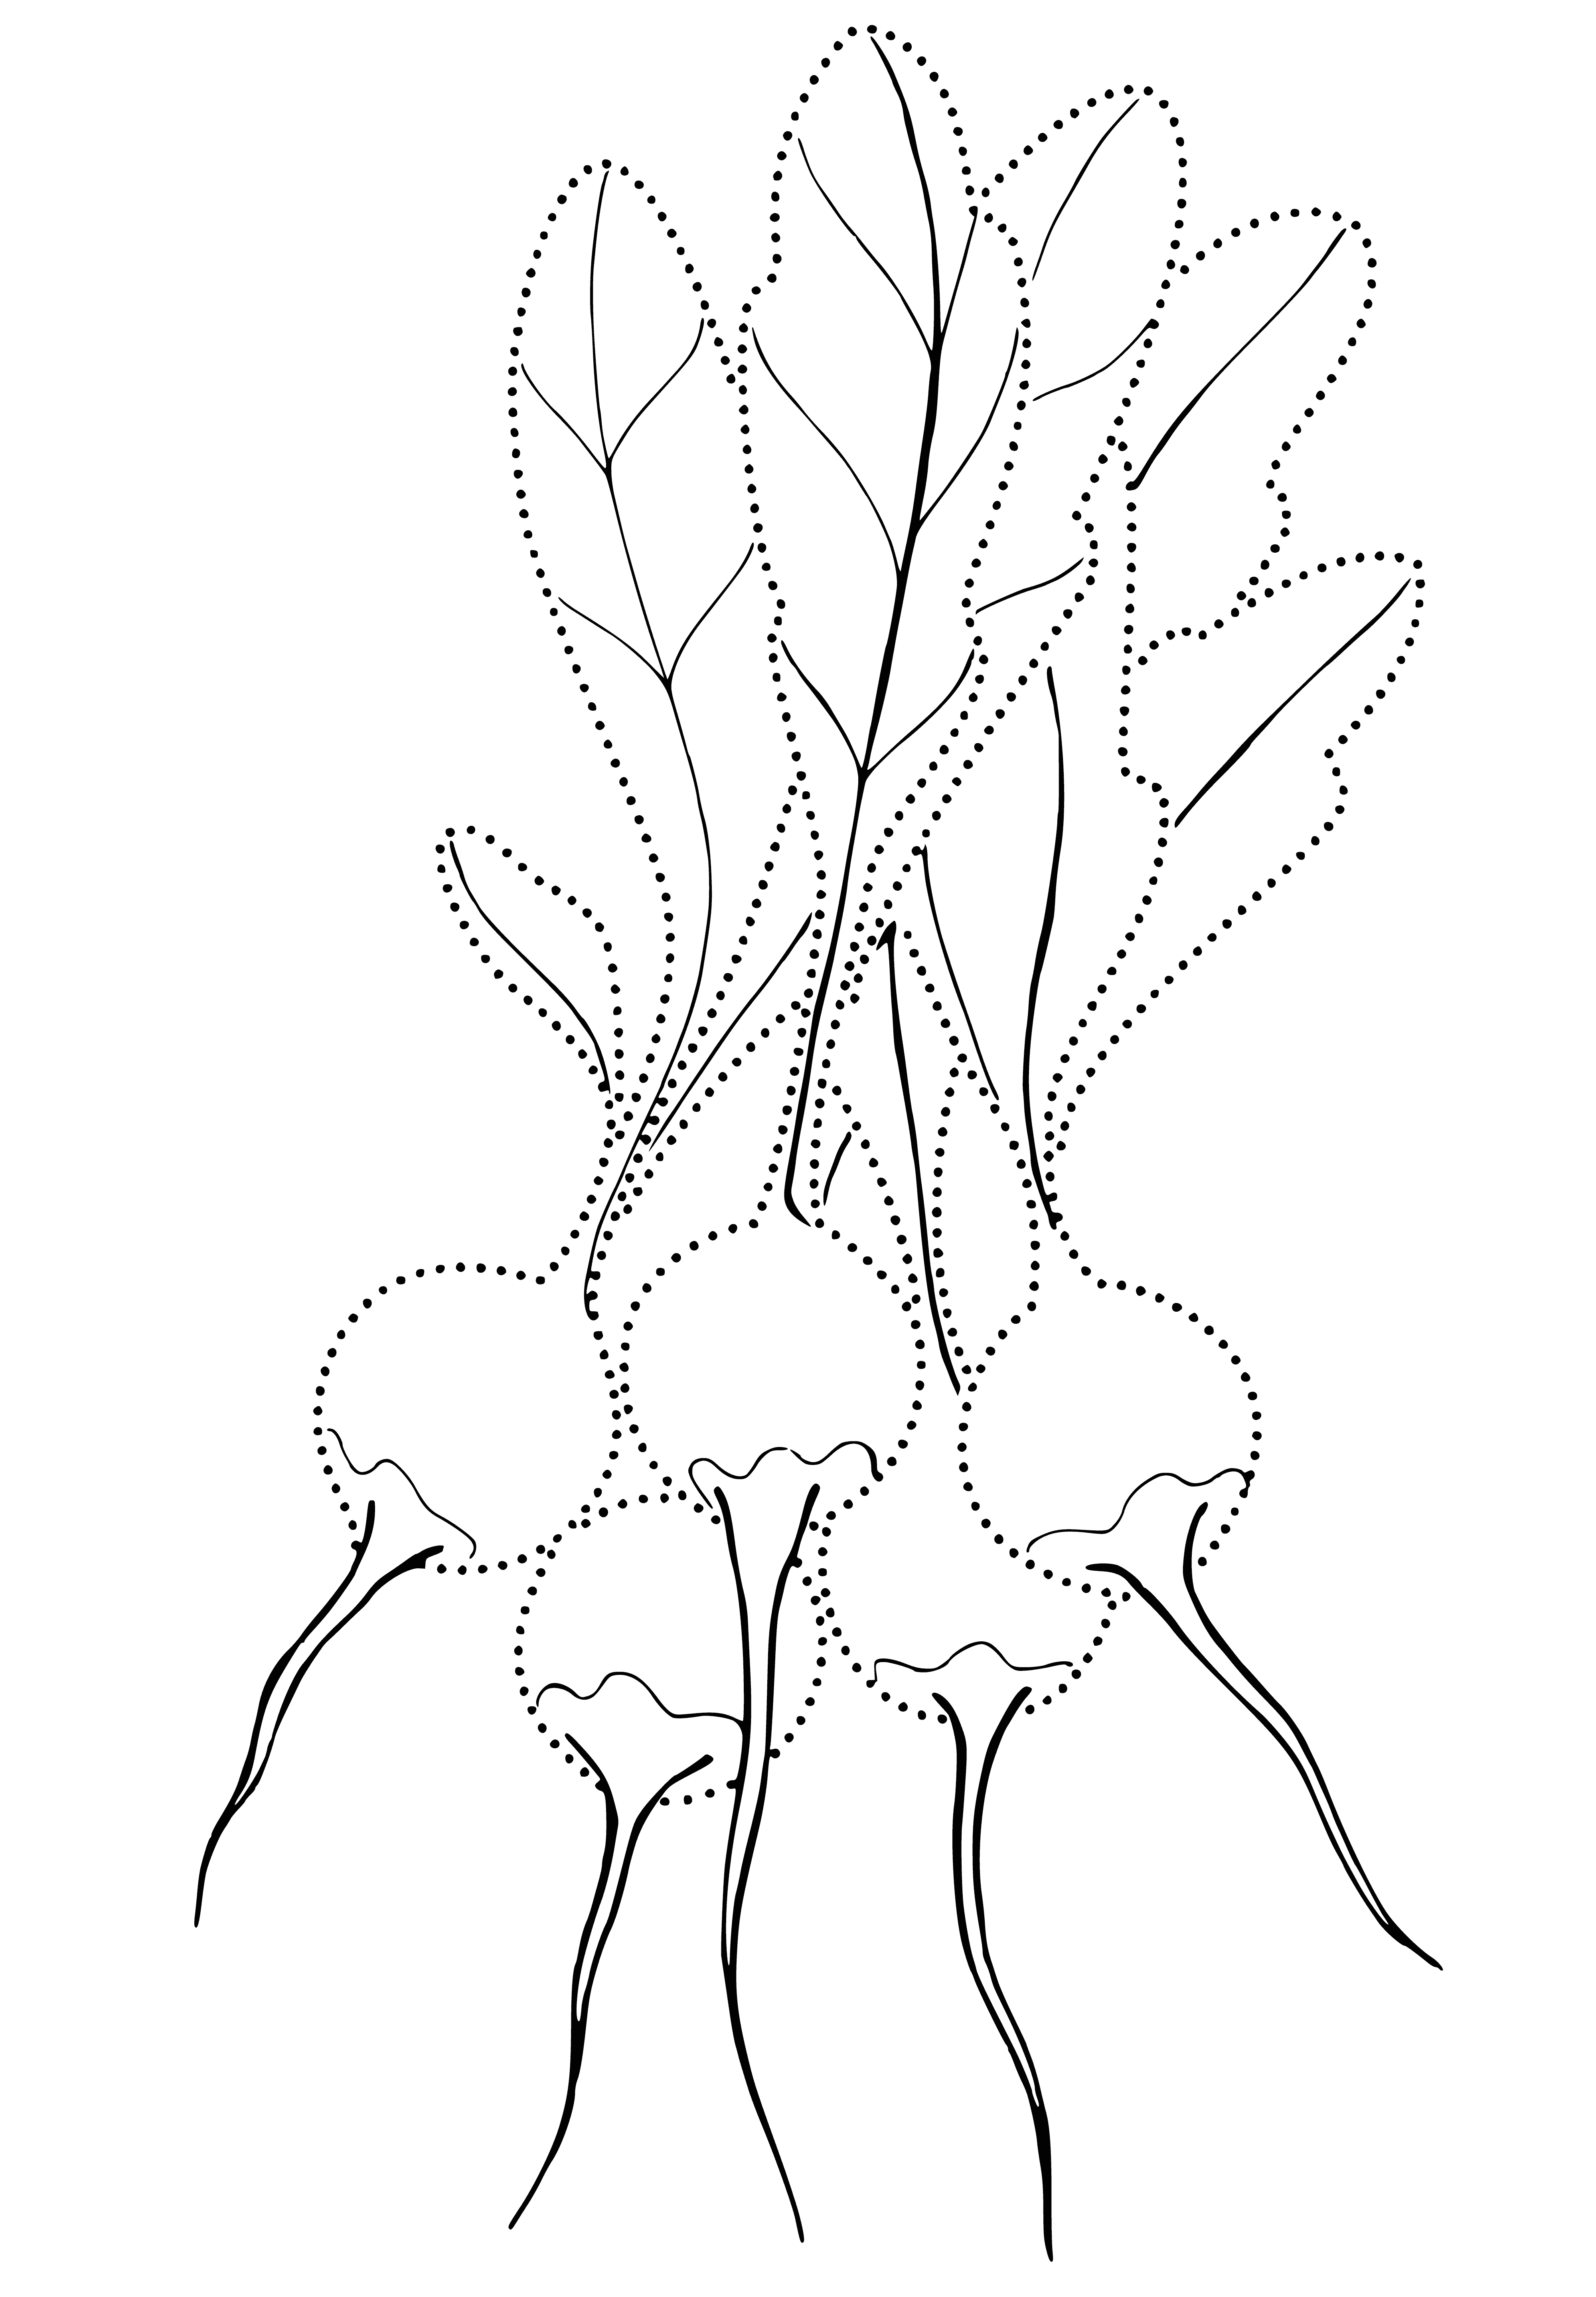 coloring page: A red radish with green stem & small leaves on top of stem. Round w/ pointy end, smooth & shiny skin. #veggies